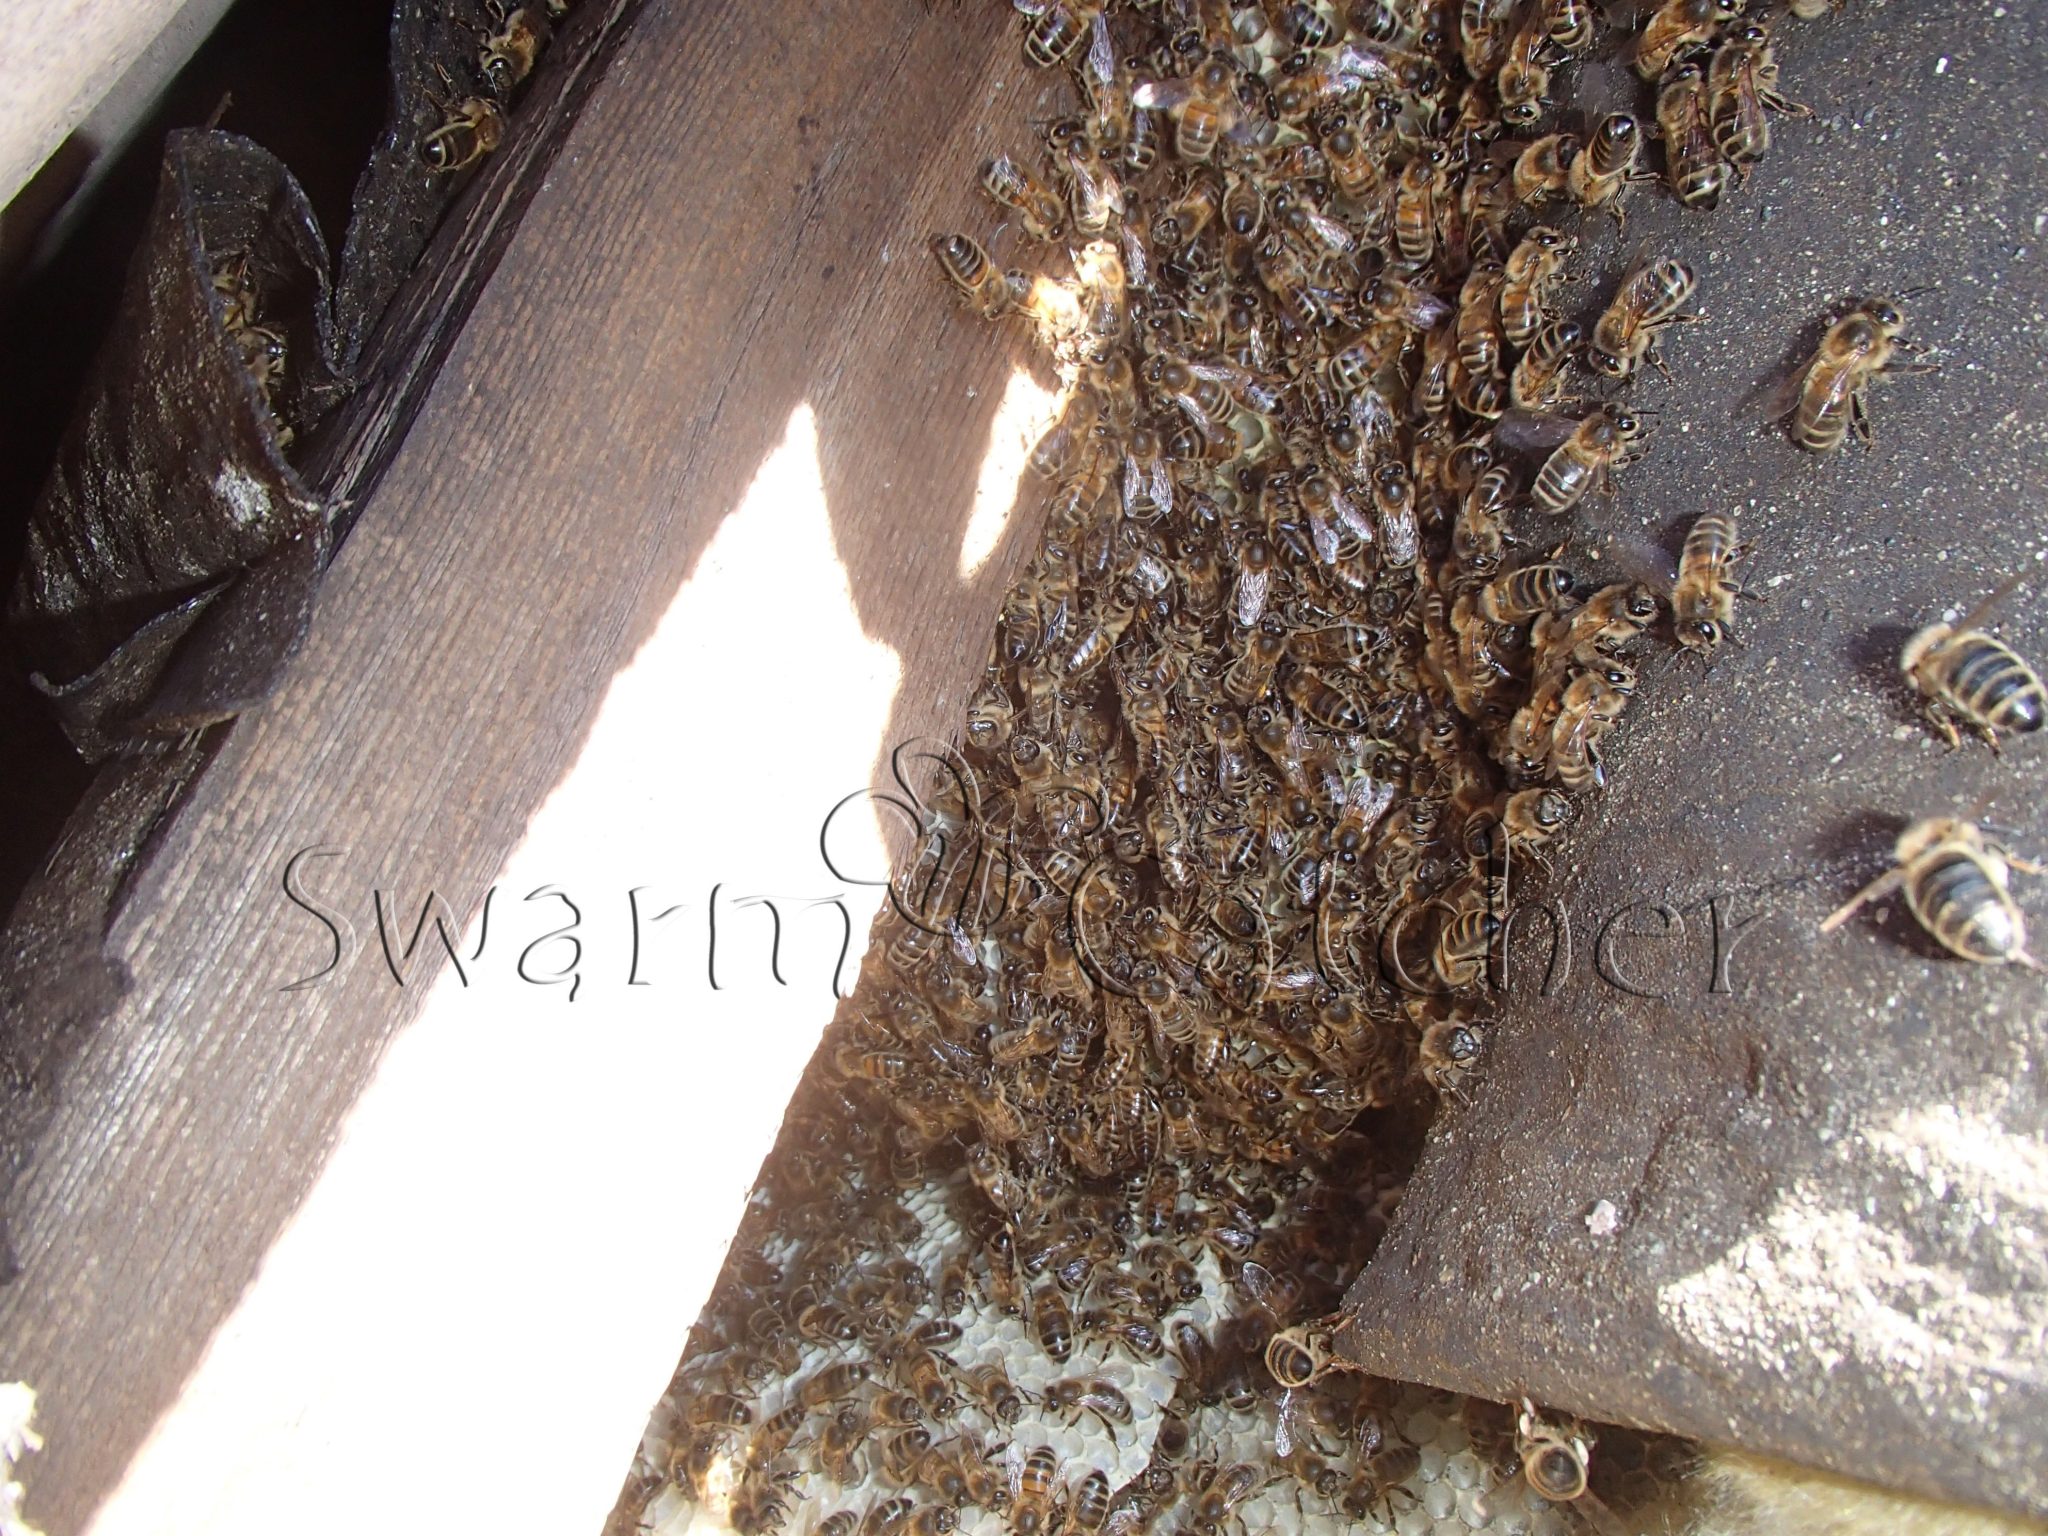 Live honey bee removal from roof space -Canton, Cardiff - bee nest removed by SwarmCatcher